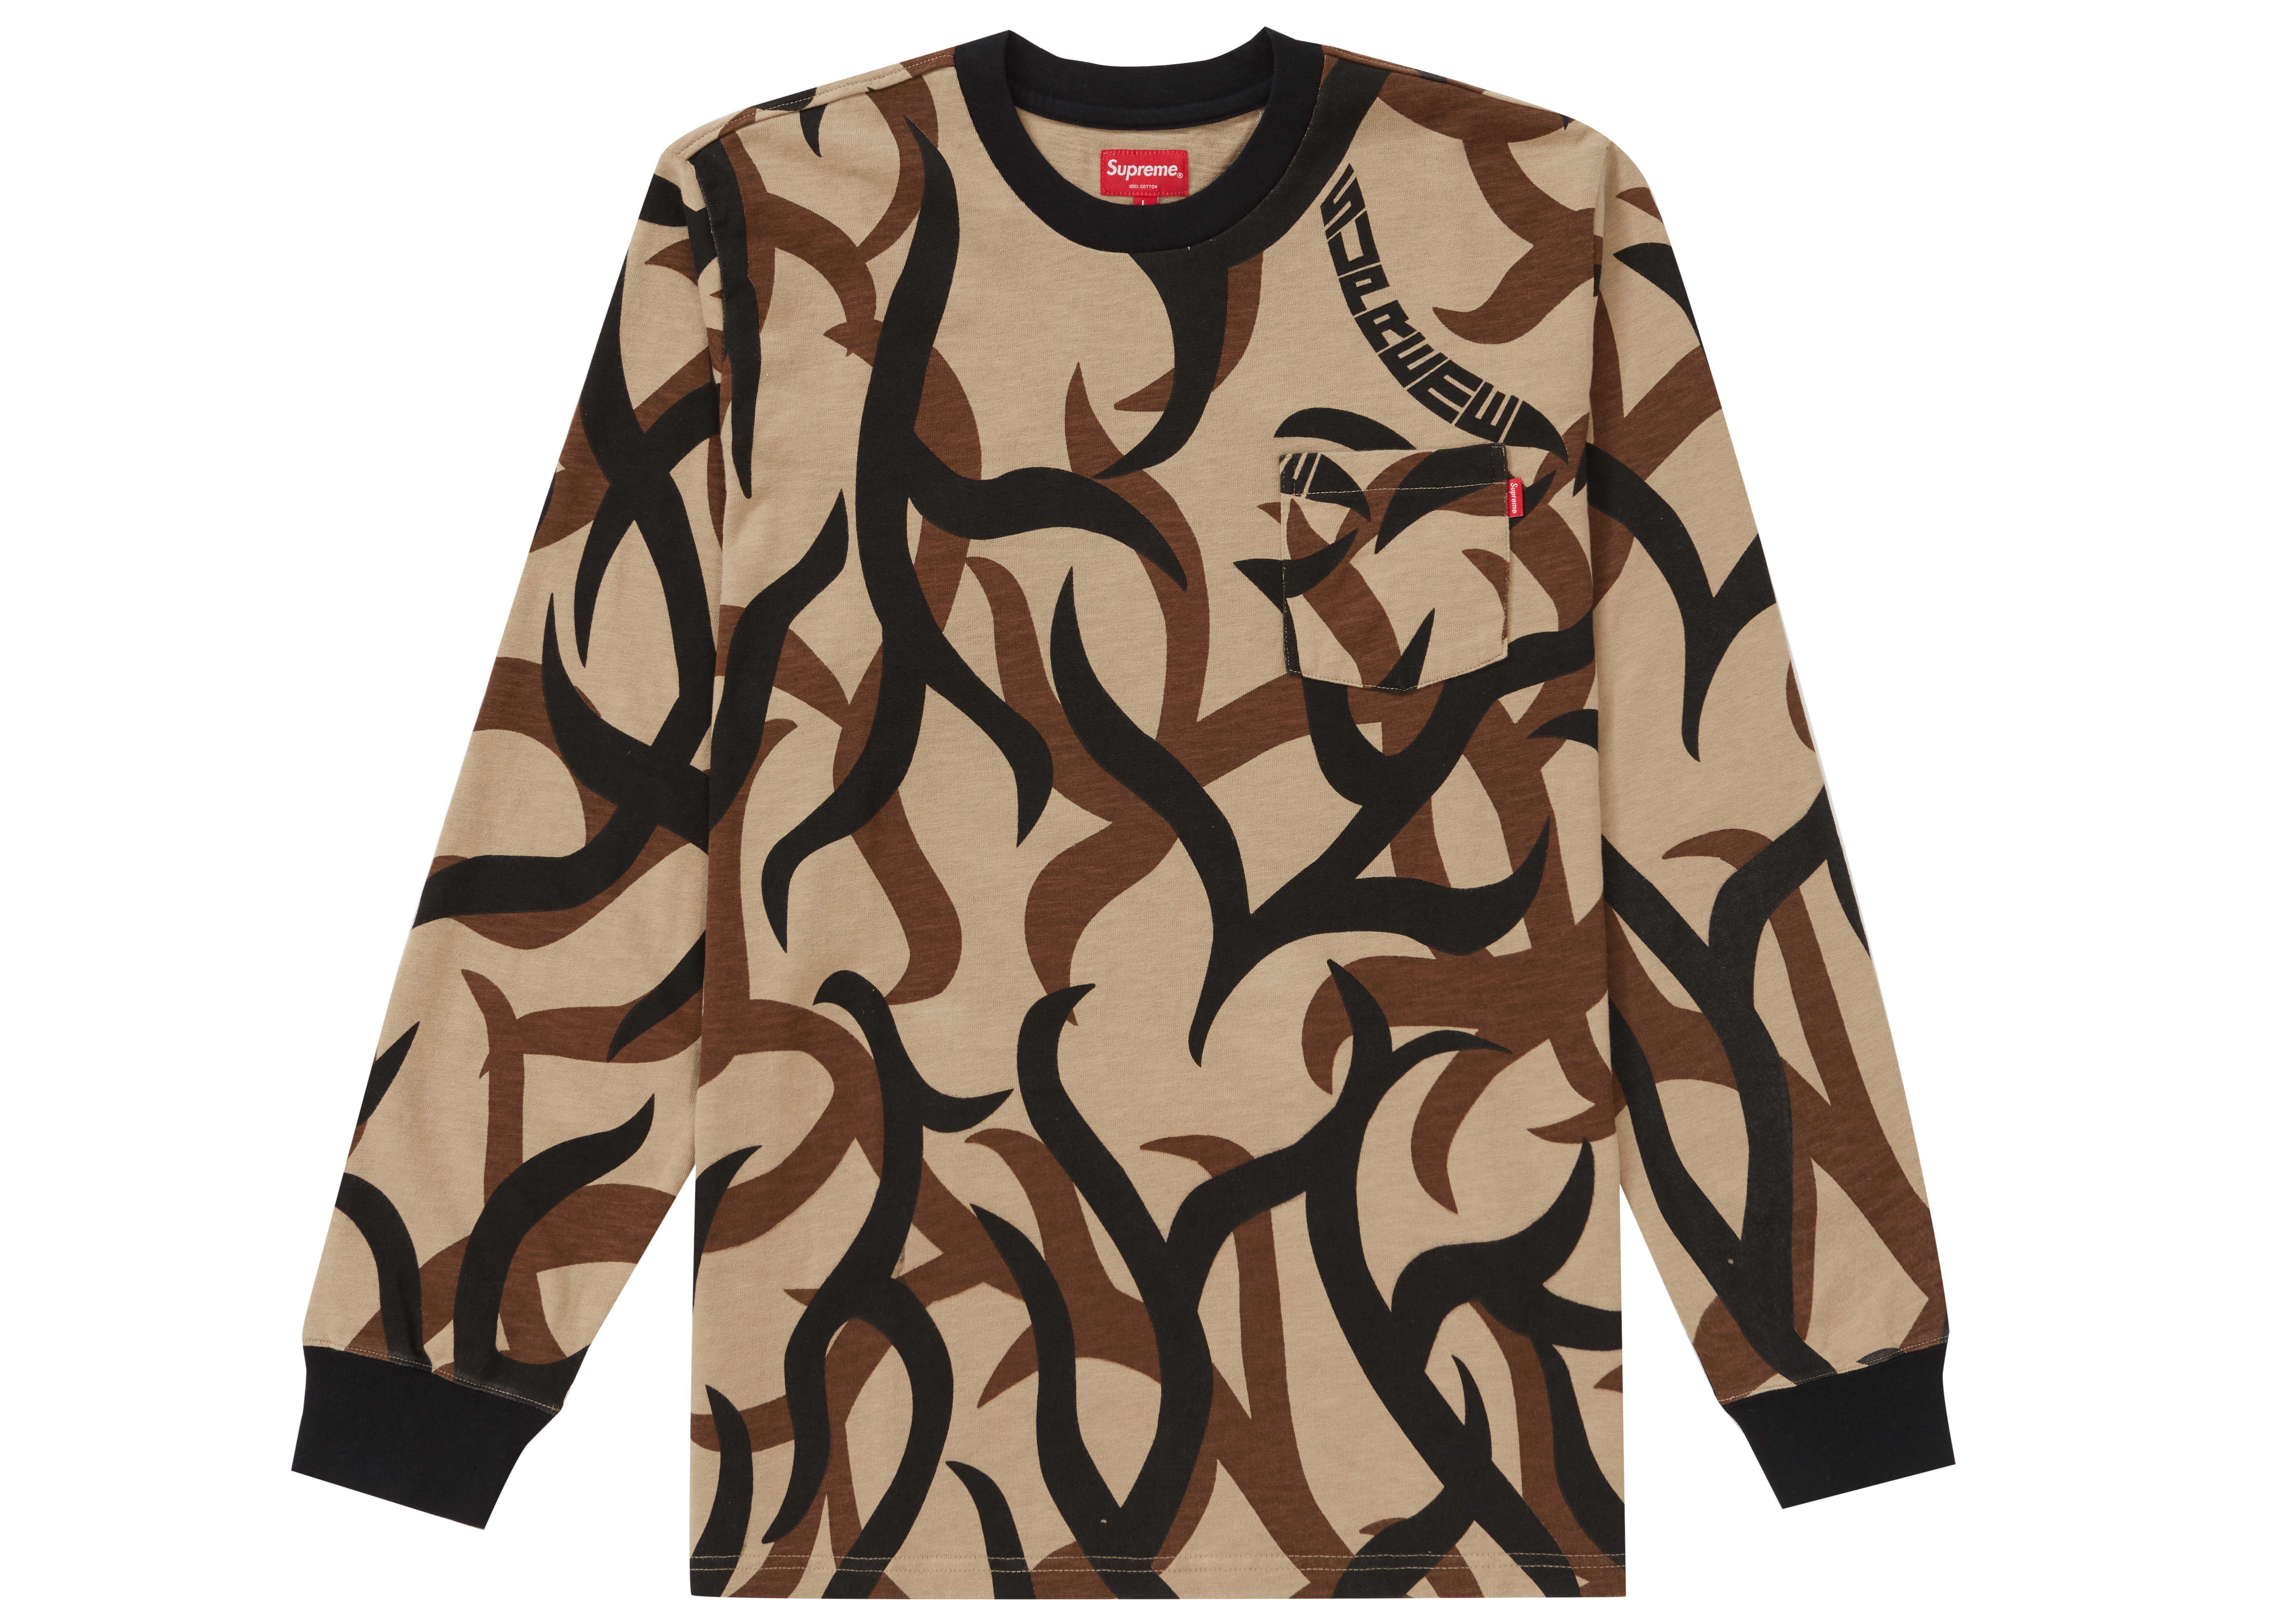 supreme☆19AW☆L/S Pocket Tee☆Tribal Camo - Tシャツ/カットソー(七